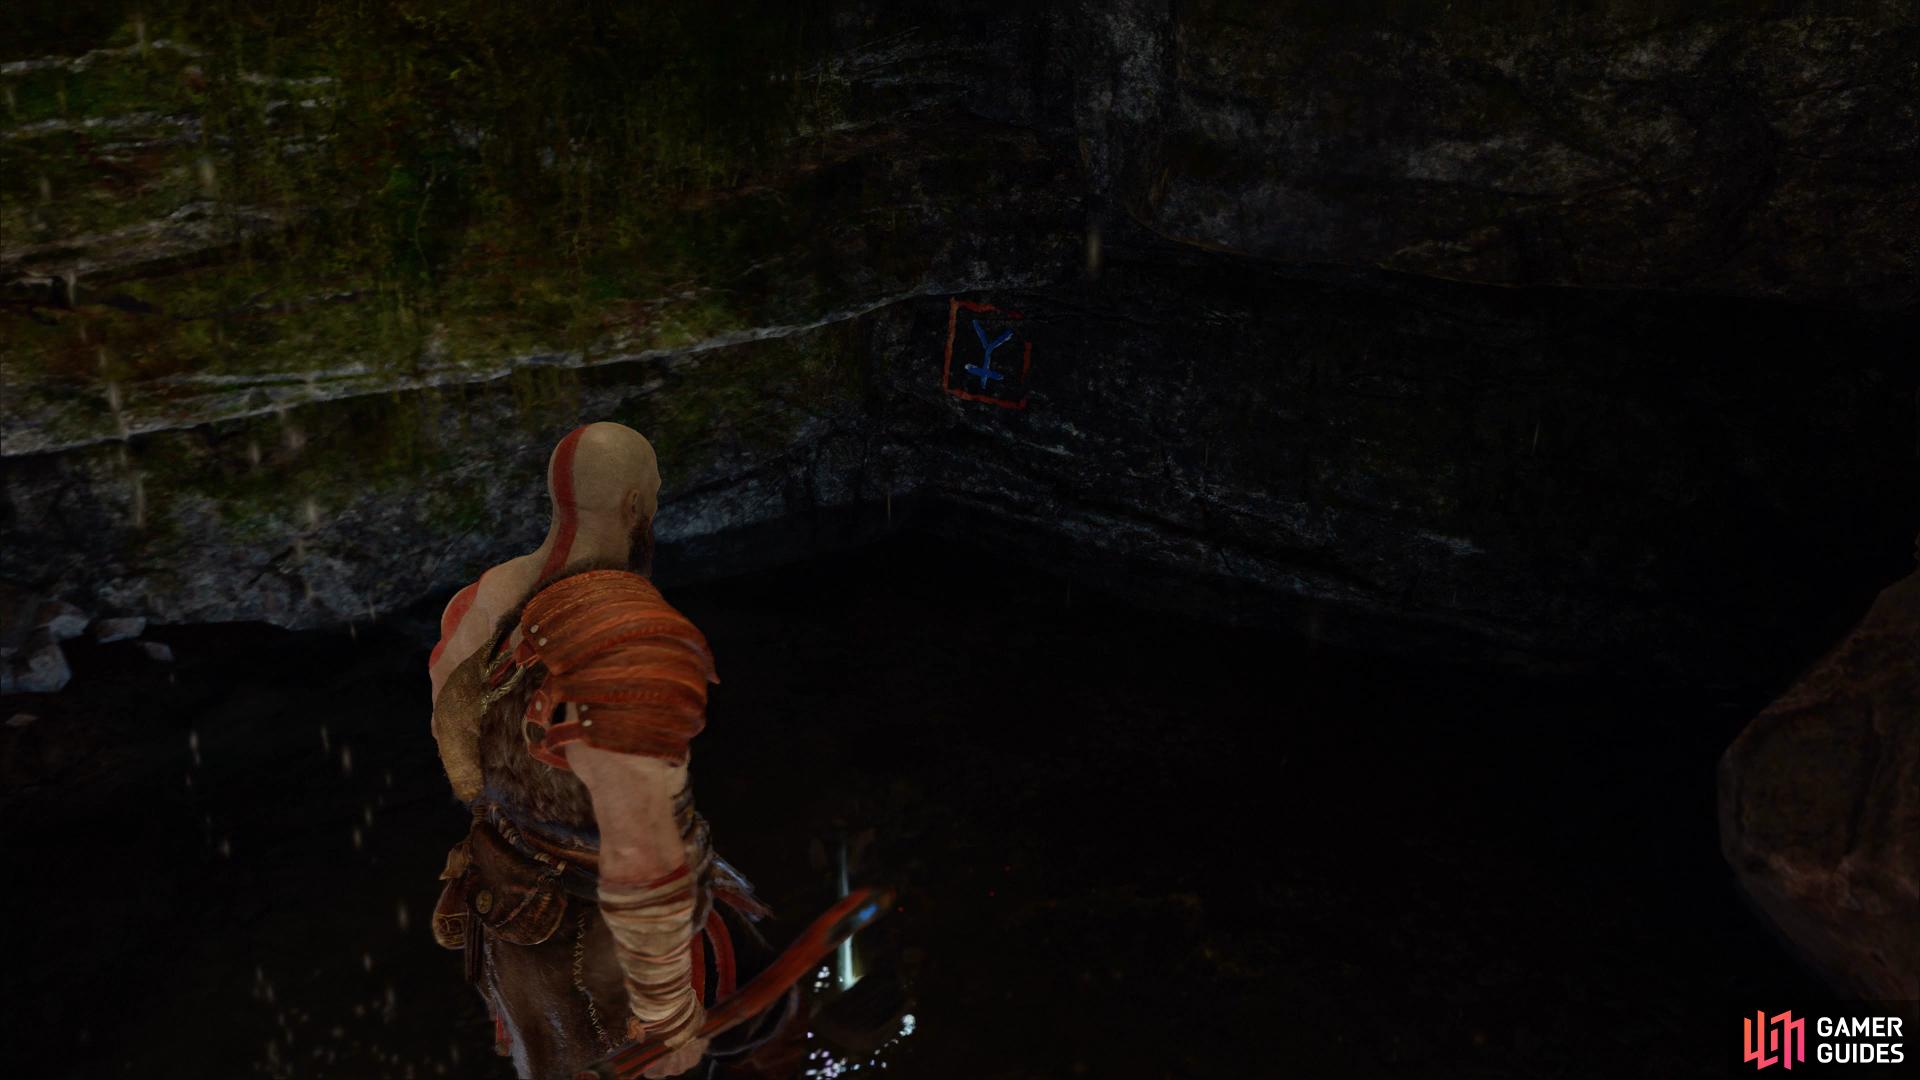 After you pass through the rune door, take a left at the fork to find Artefact